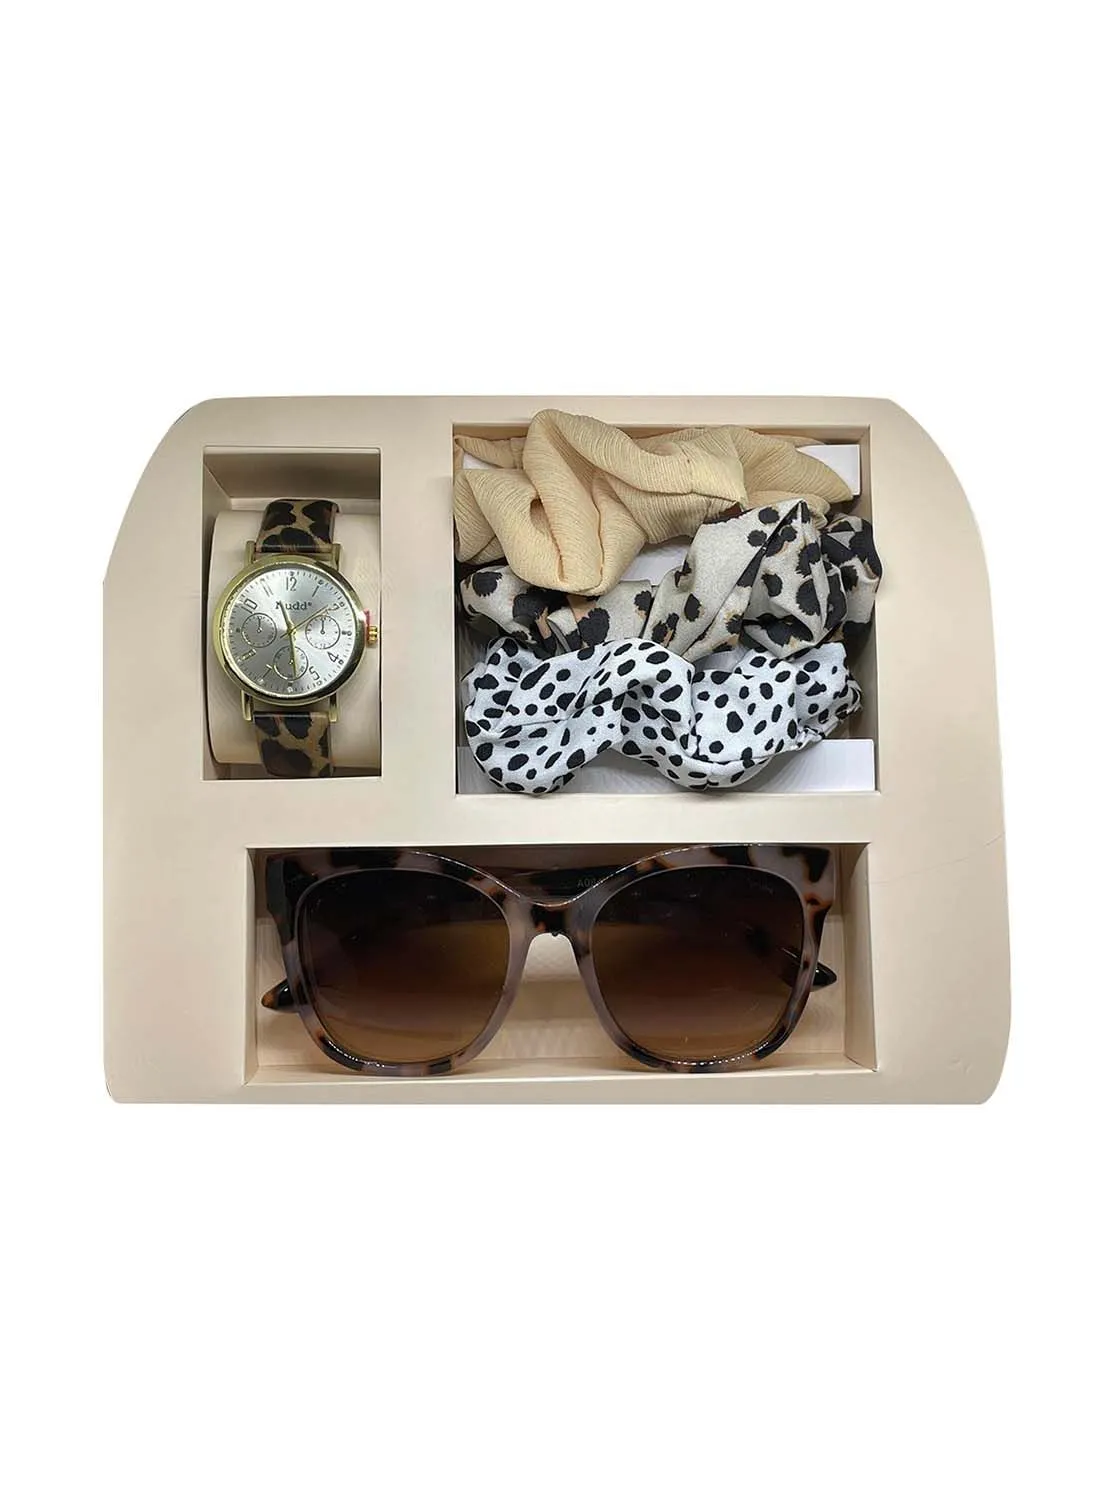 Mudd Ladies Analog Animal Print Watch with Matching Sunglasses and Hair Accessories